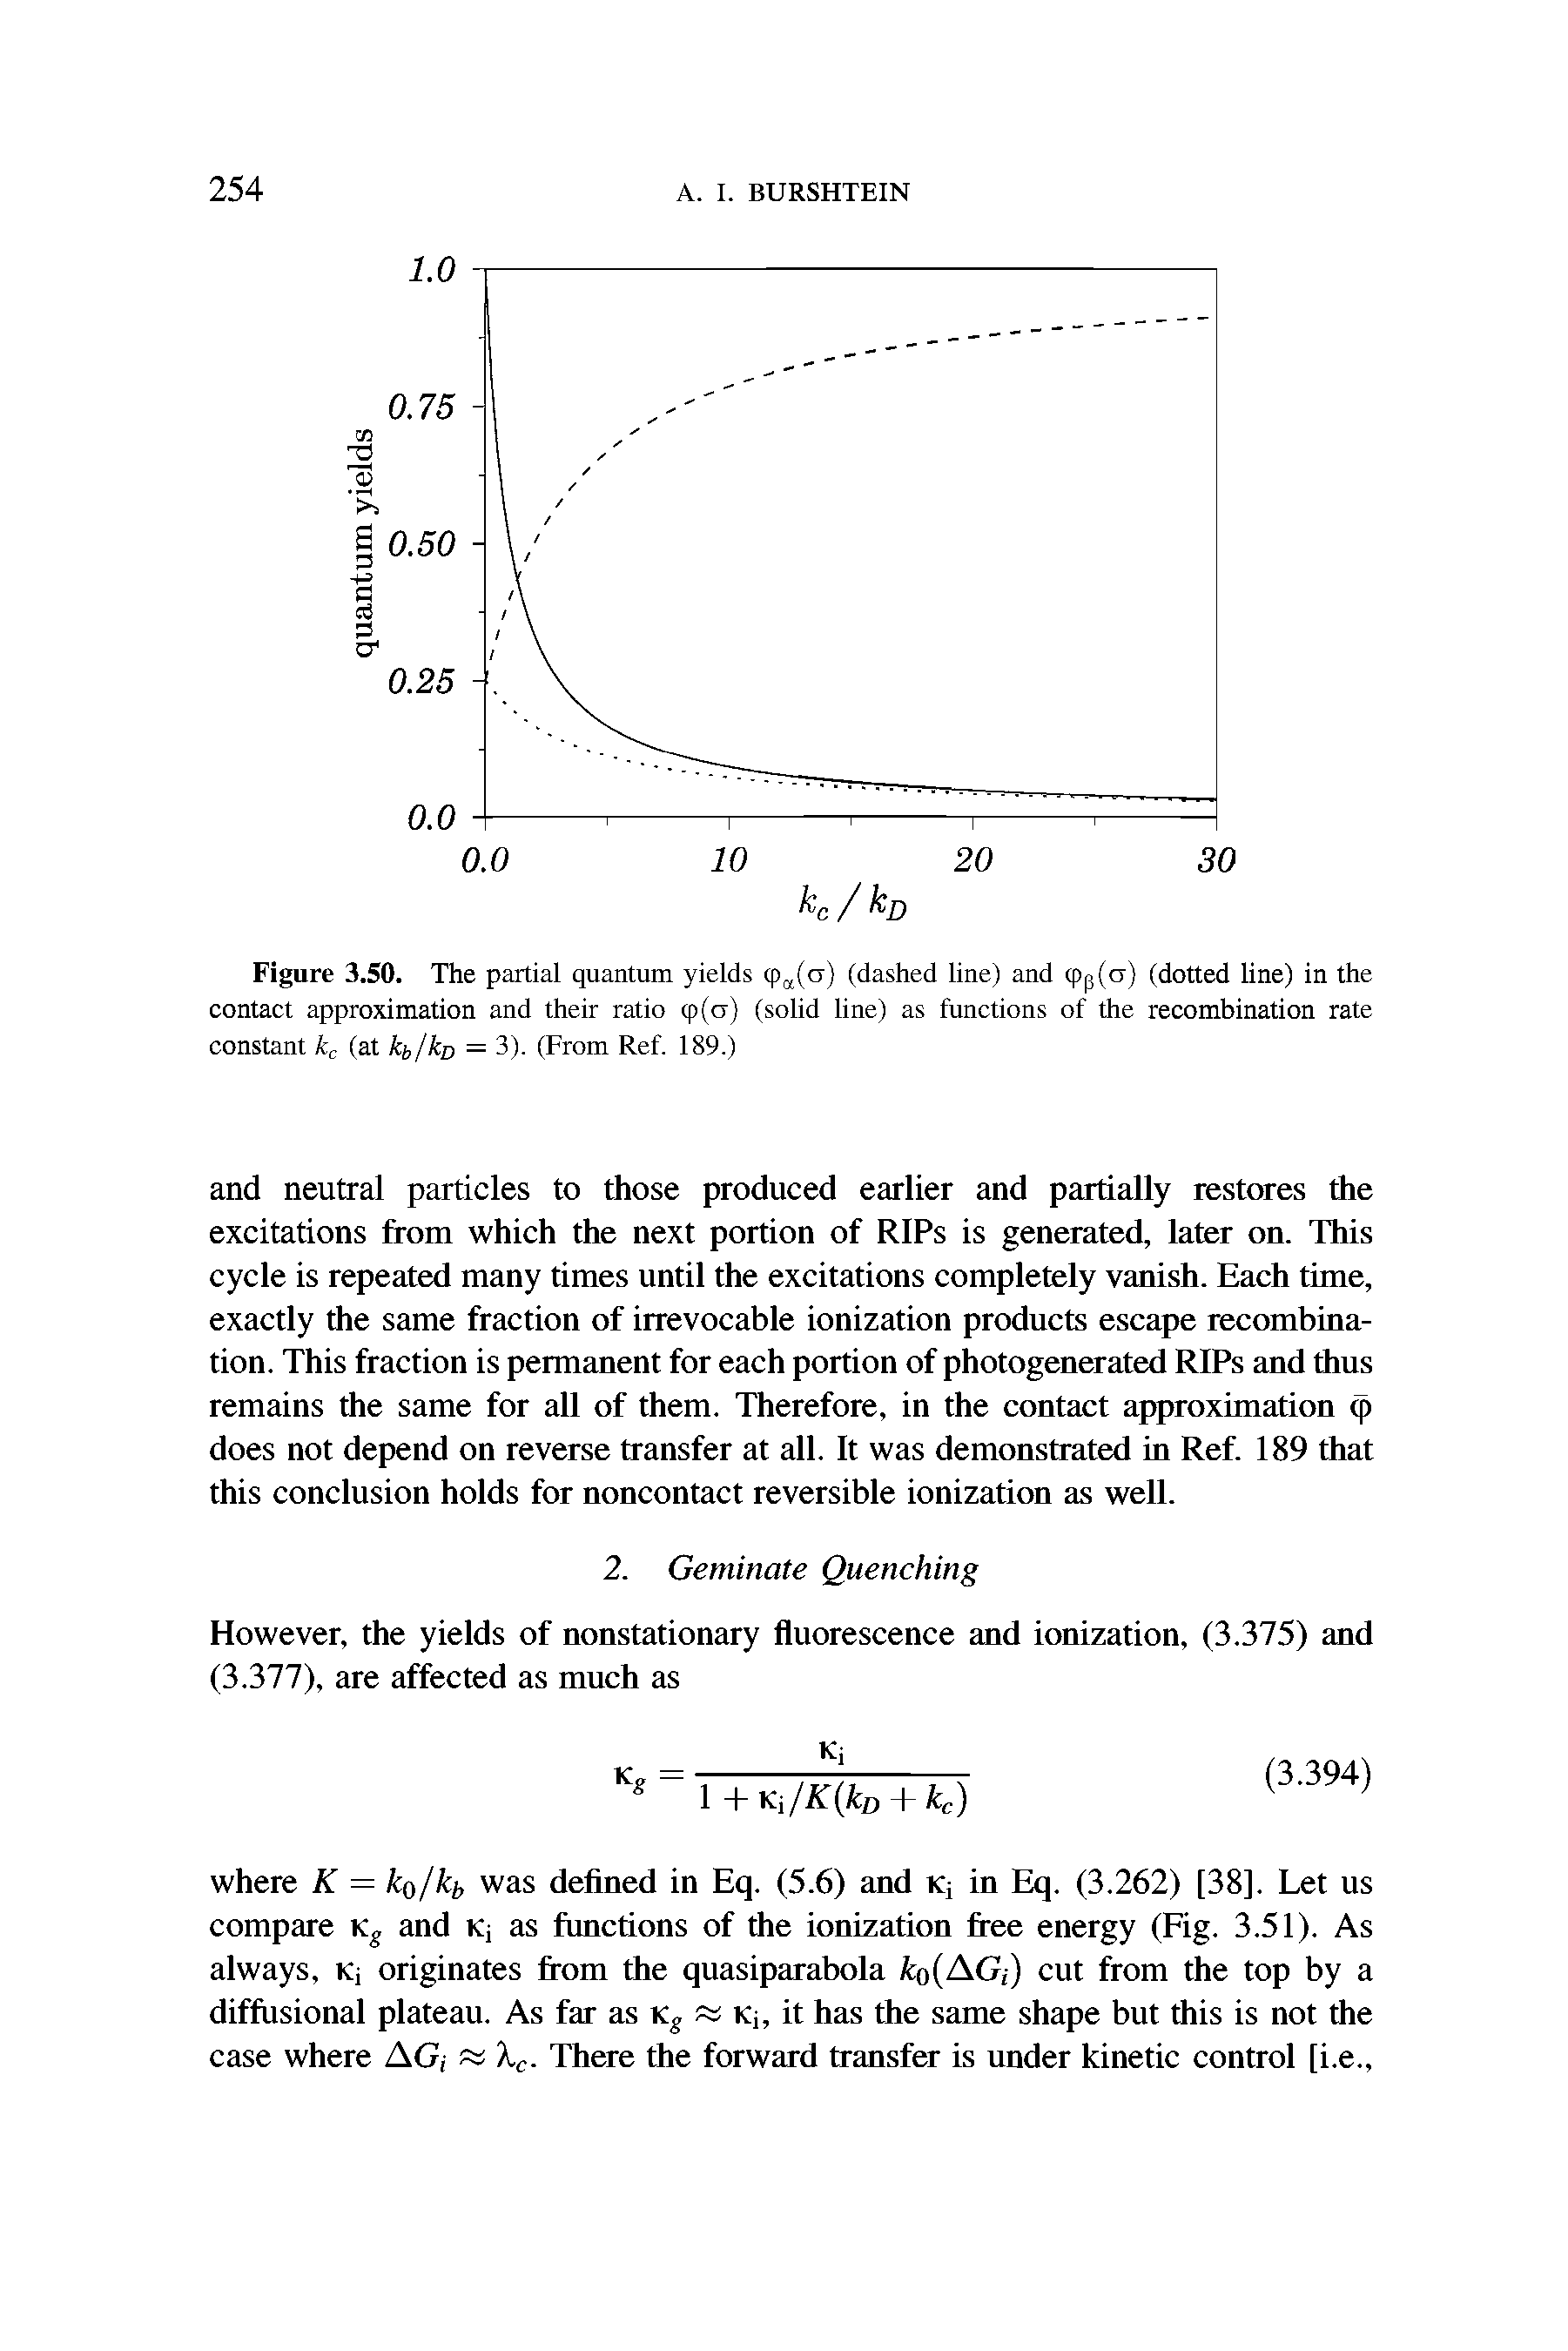 Figure 3.50. The partial quantum yields <p ,(a) (dashed line) and <Pp(a) (dotted line) in the contact approximation and their ratio <p(a) (solid line) as functions of the recombination rate constant kc (at k /kt, = 3). (From Ref. 189.)...